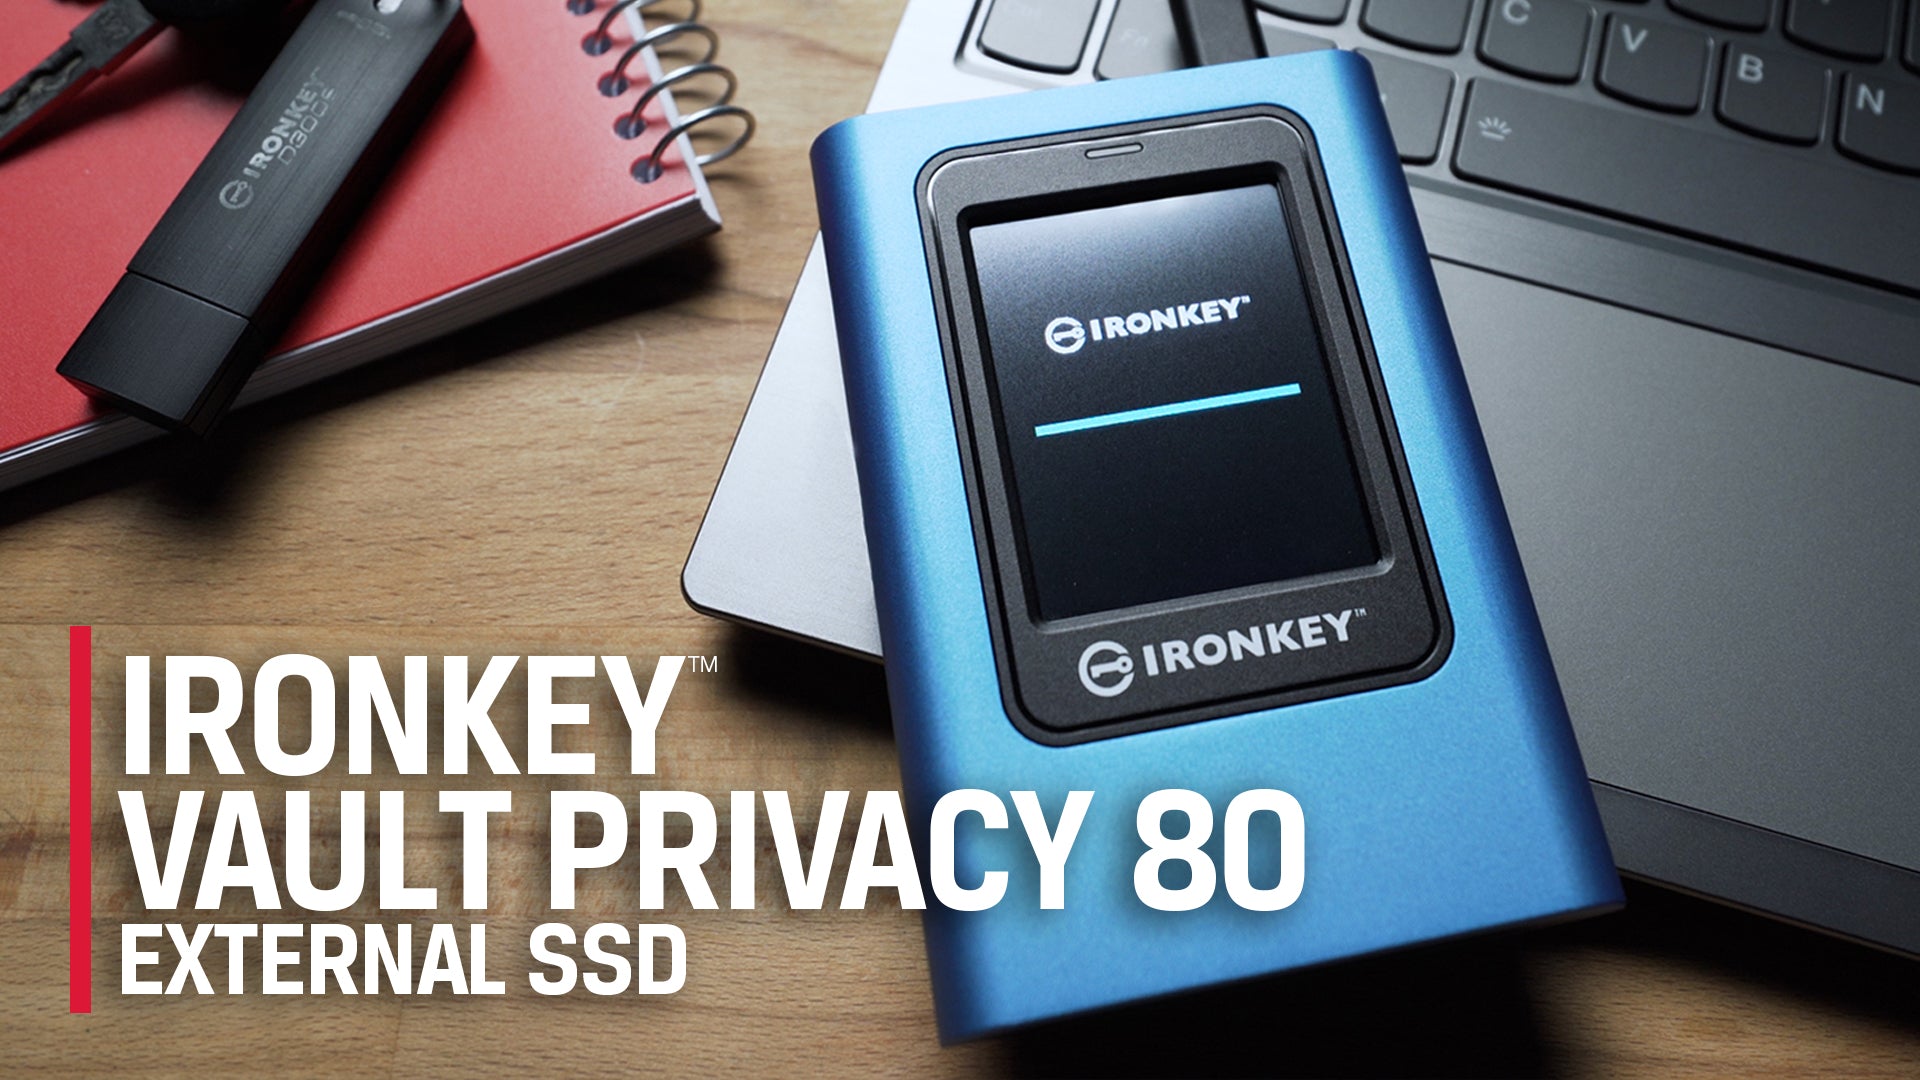 IronKey Vault Privacy 80 External SSD | FIPS 197 Certified